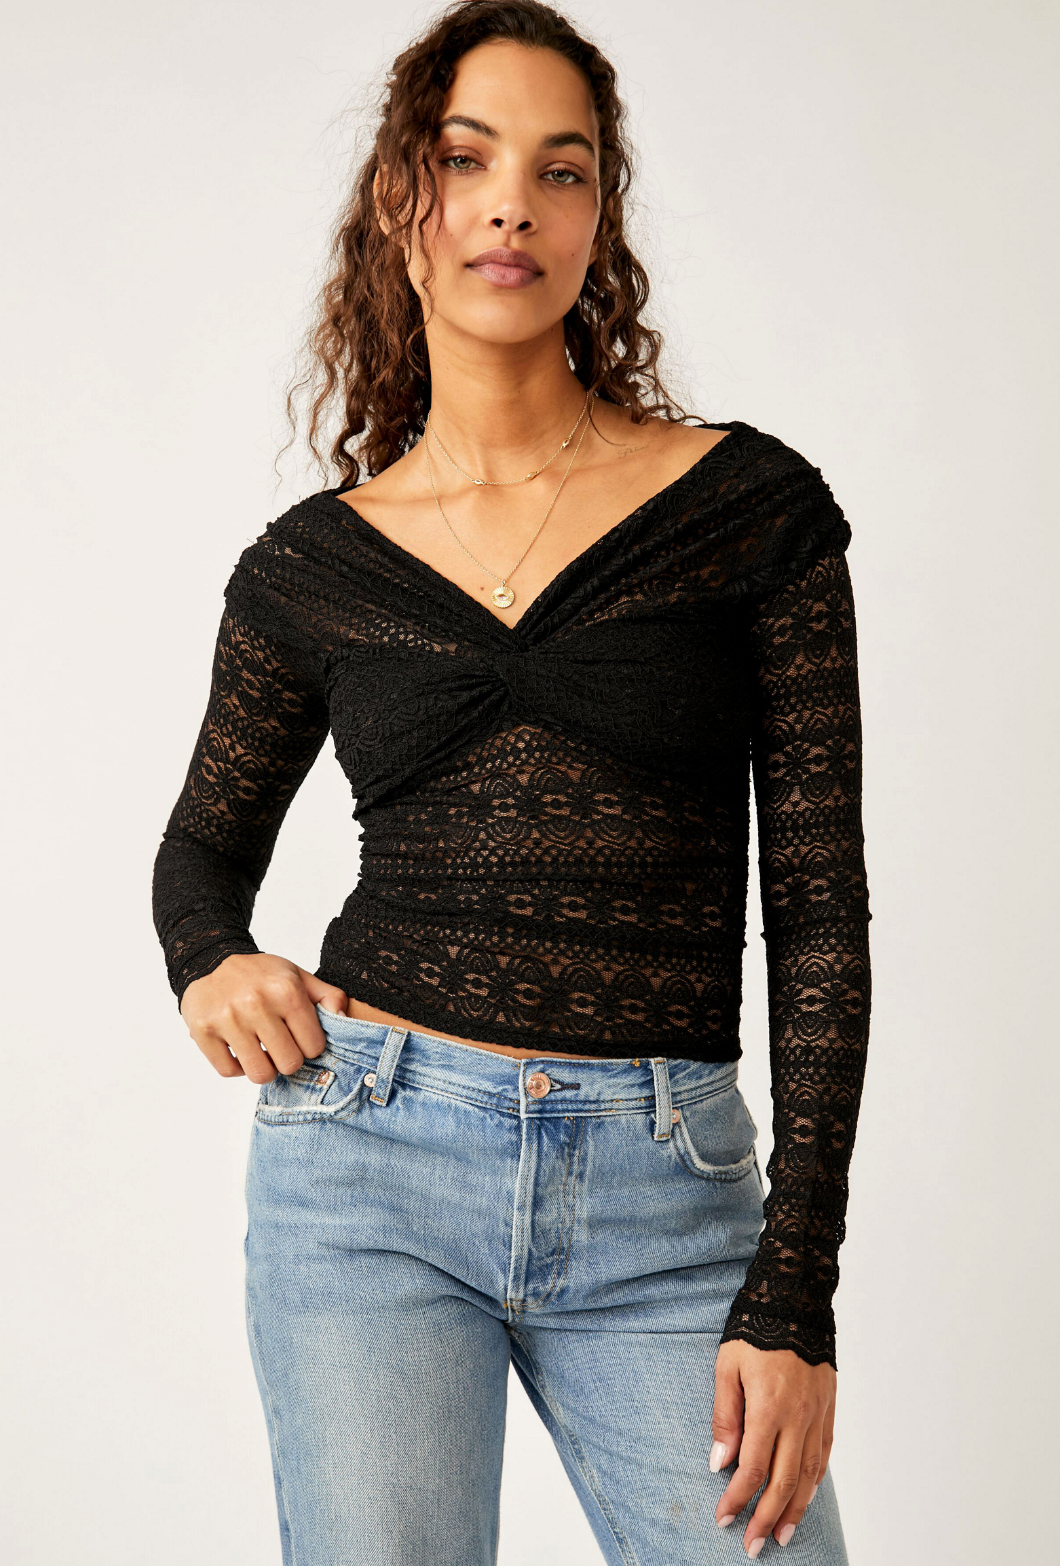 Free People Hold Me Closer Top OB1783479